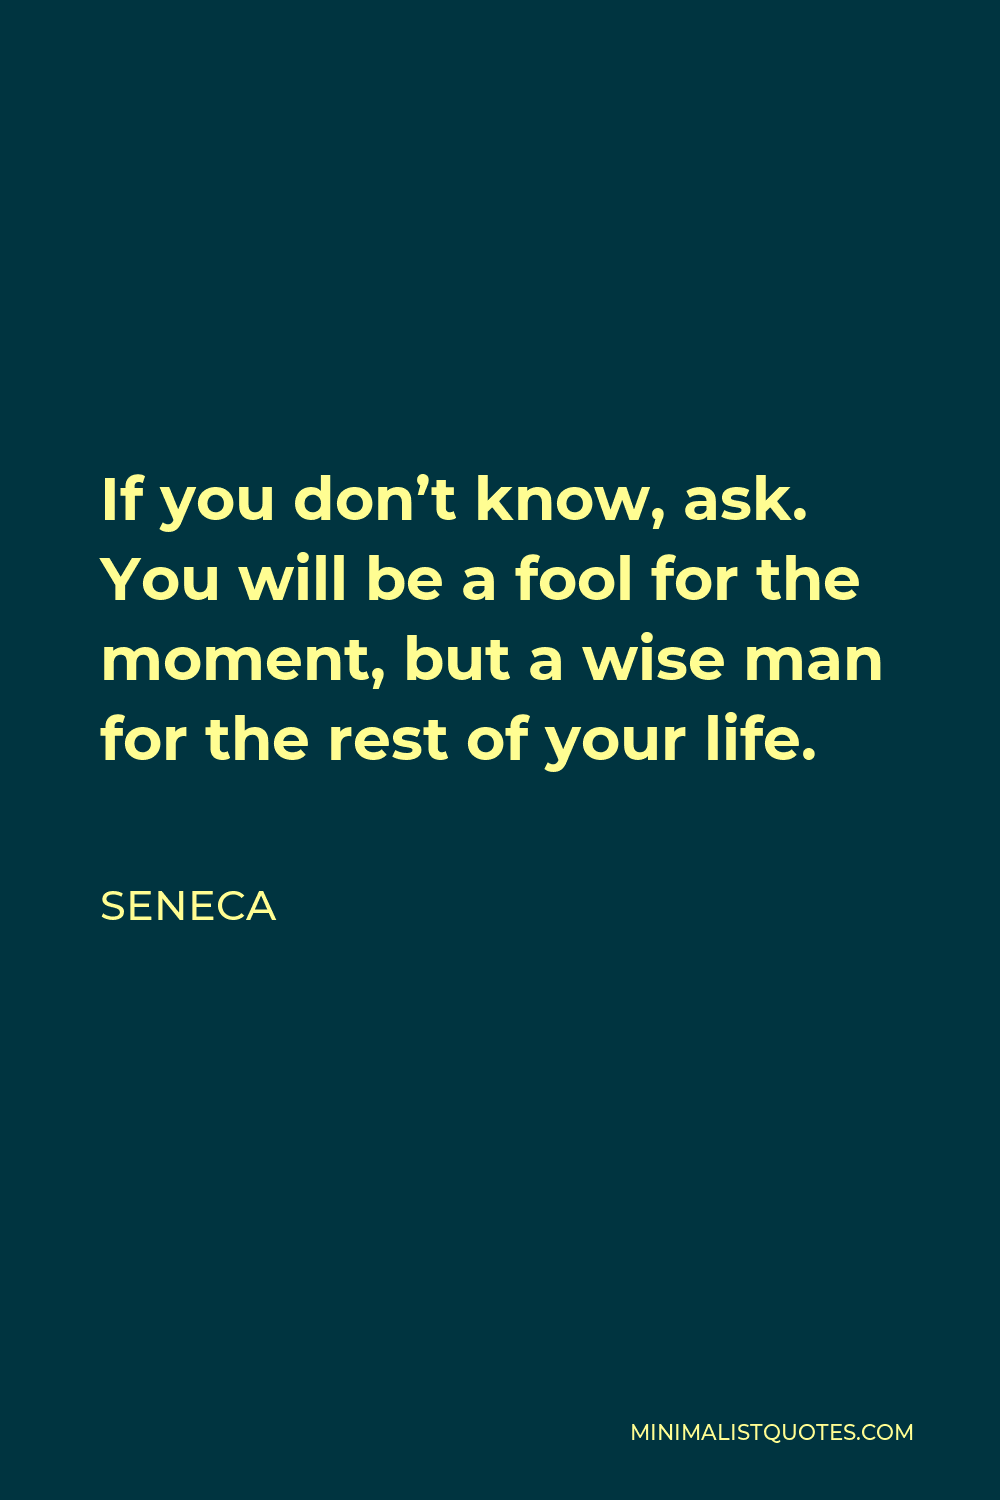 Seneca Quote - If you don’t know, ask. You will be a fool for the moment, but a wise man for the rest of your life.